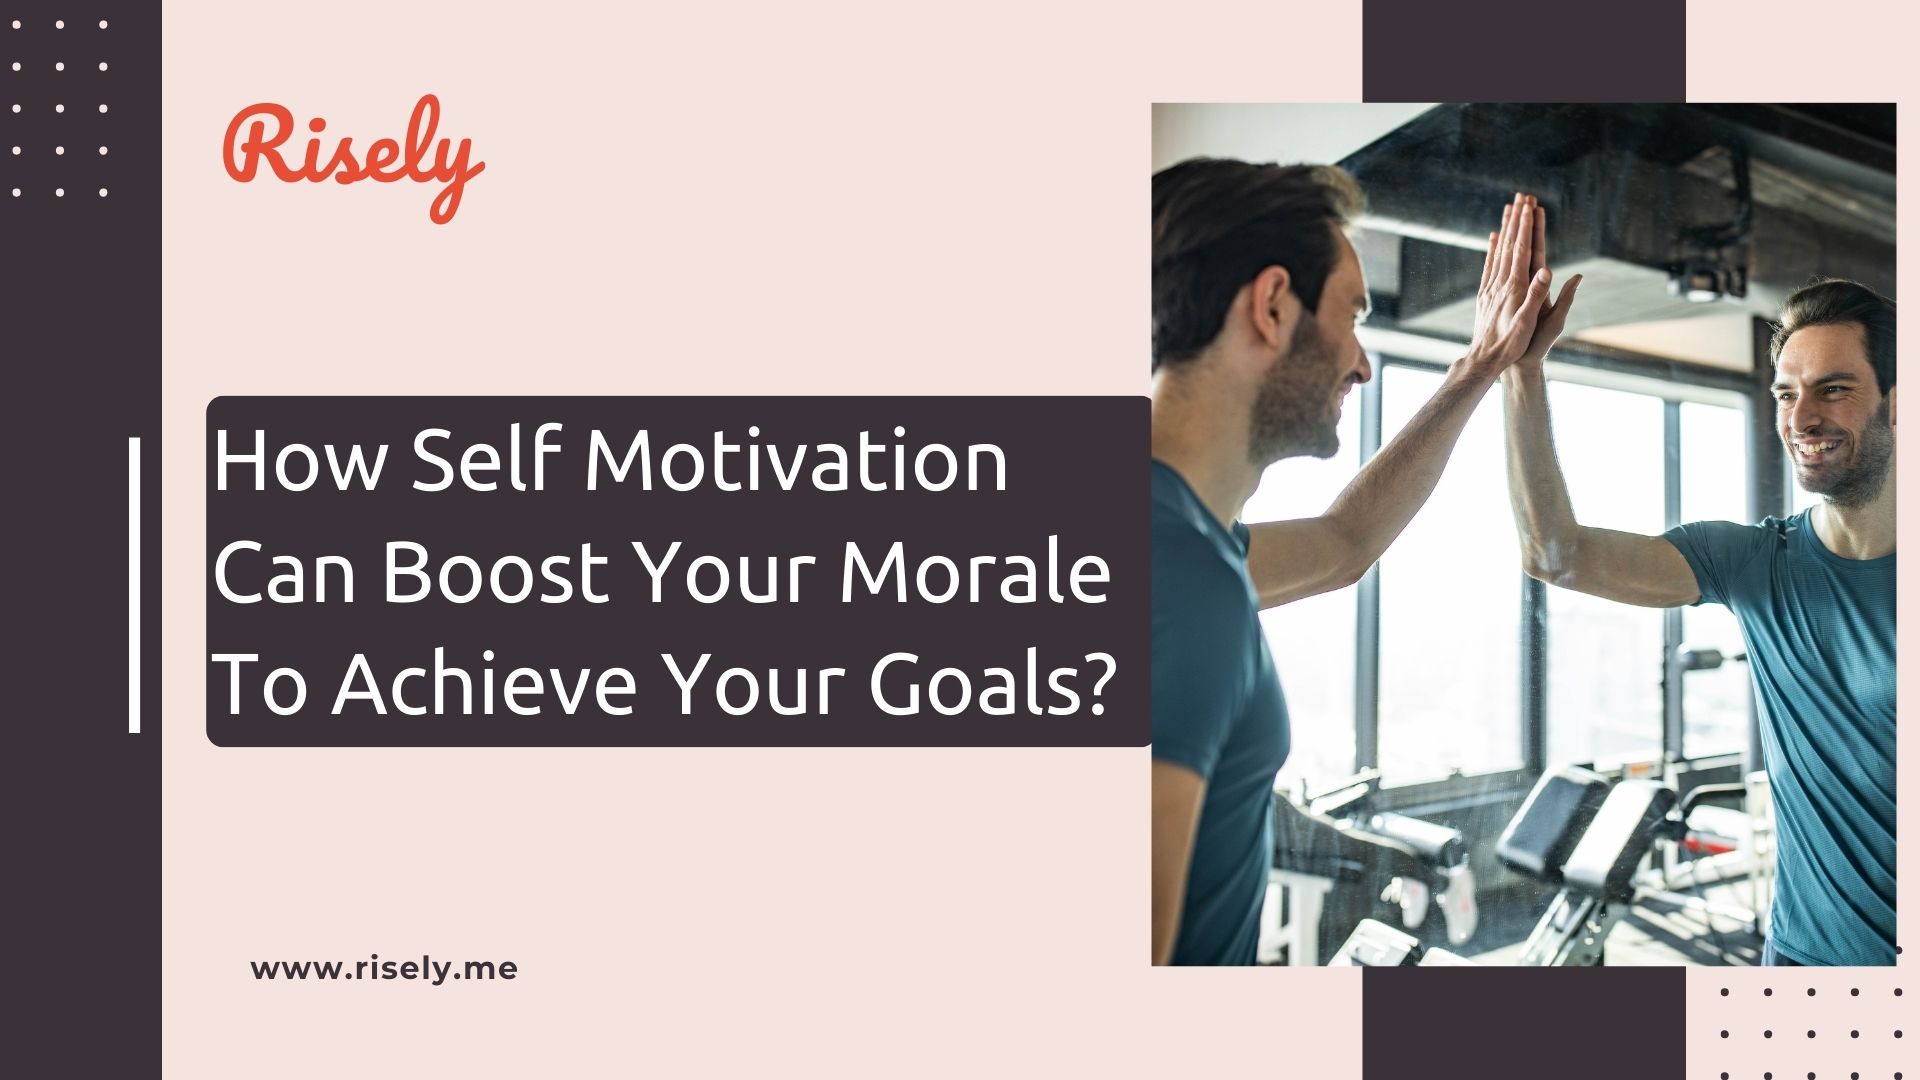 How Self Motivation Can Boost Your Morale To Achieve Your Goals?